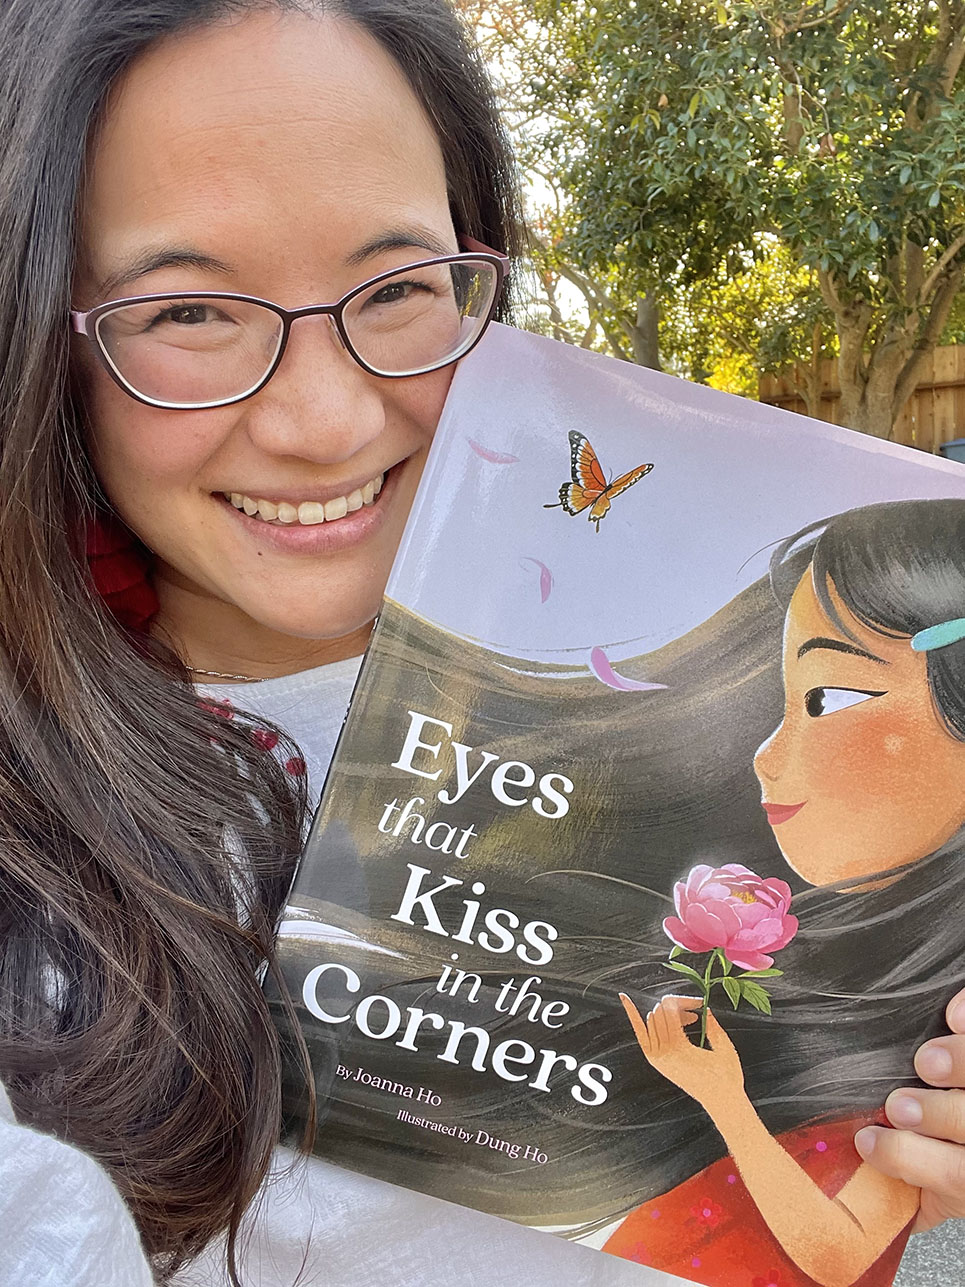 Joanna Ho with Book: Eyes That Kiss In the Corners